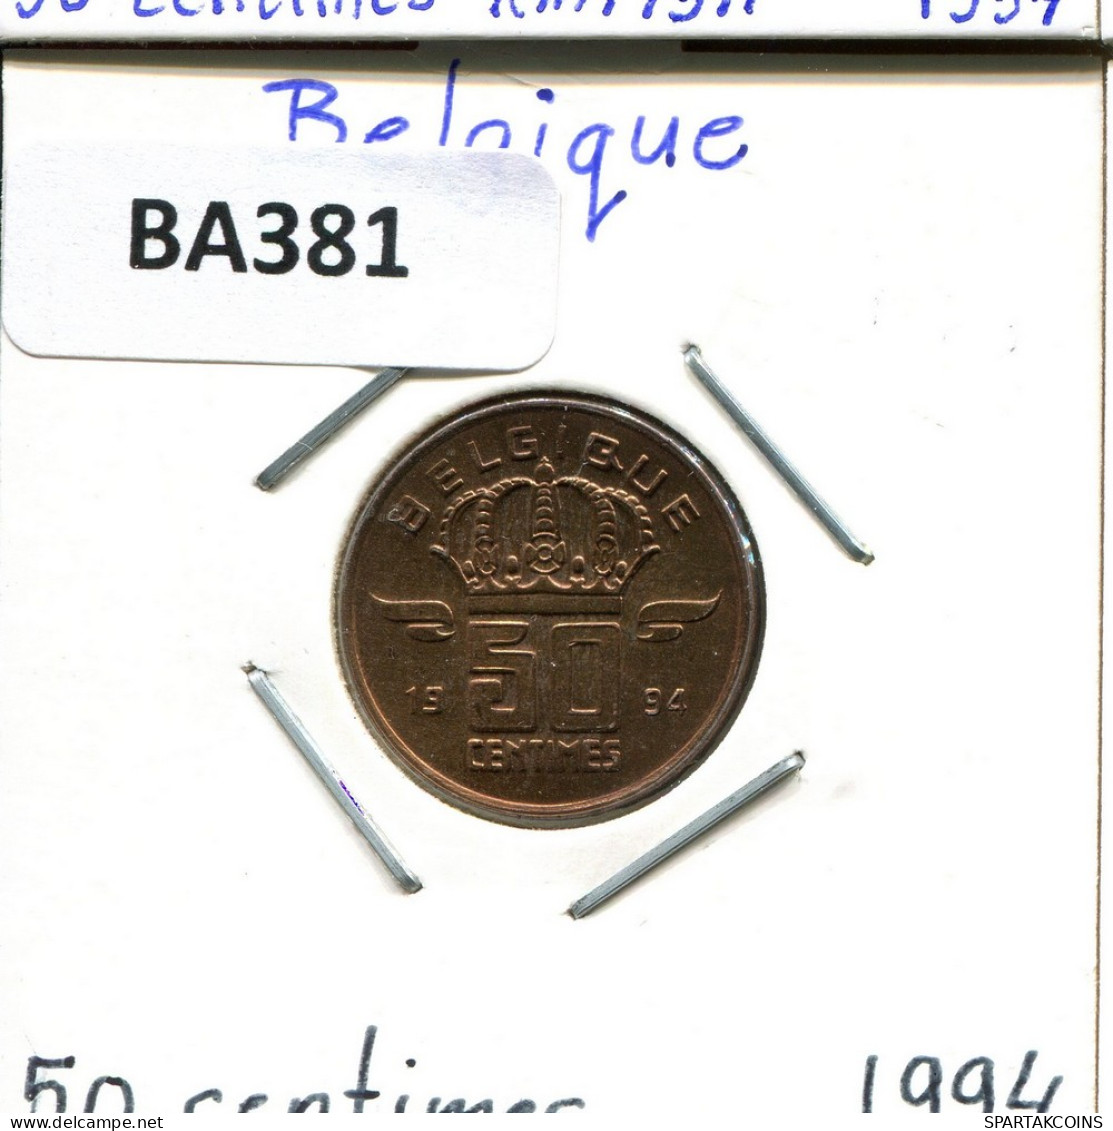 50 CENTIMES 1994 FRENCH Text BELGIUM Coin #BA381.U - 50 Centimes